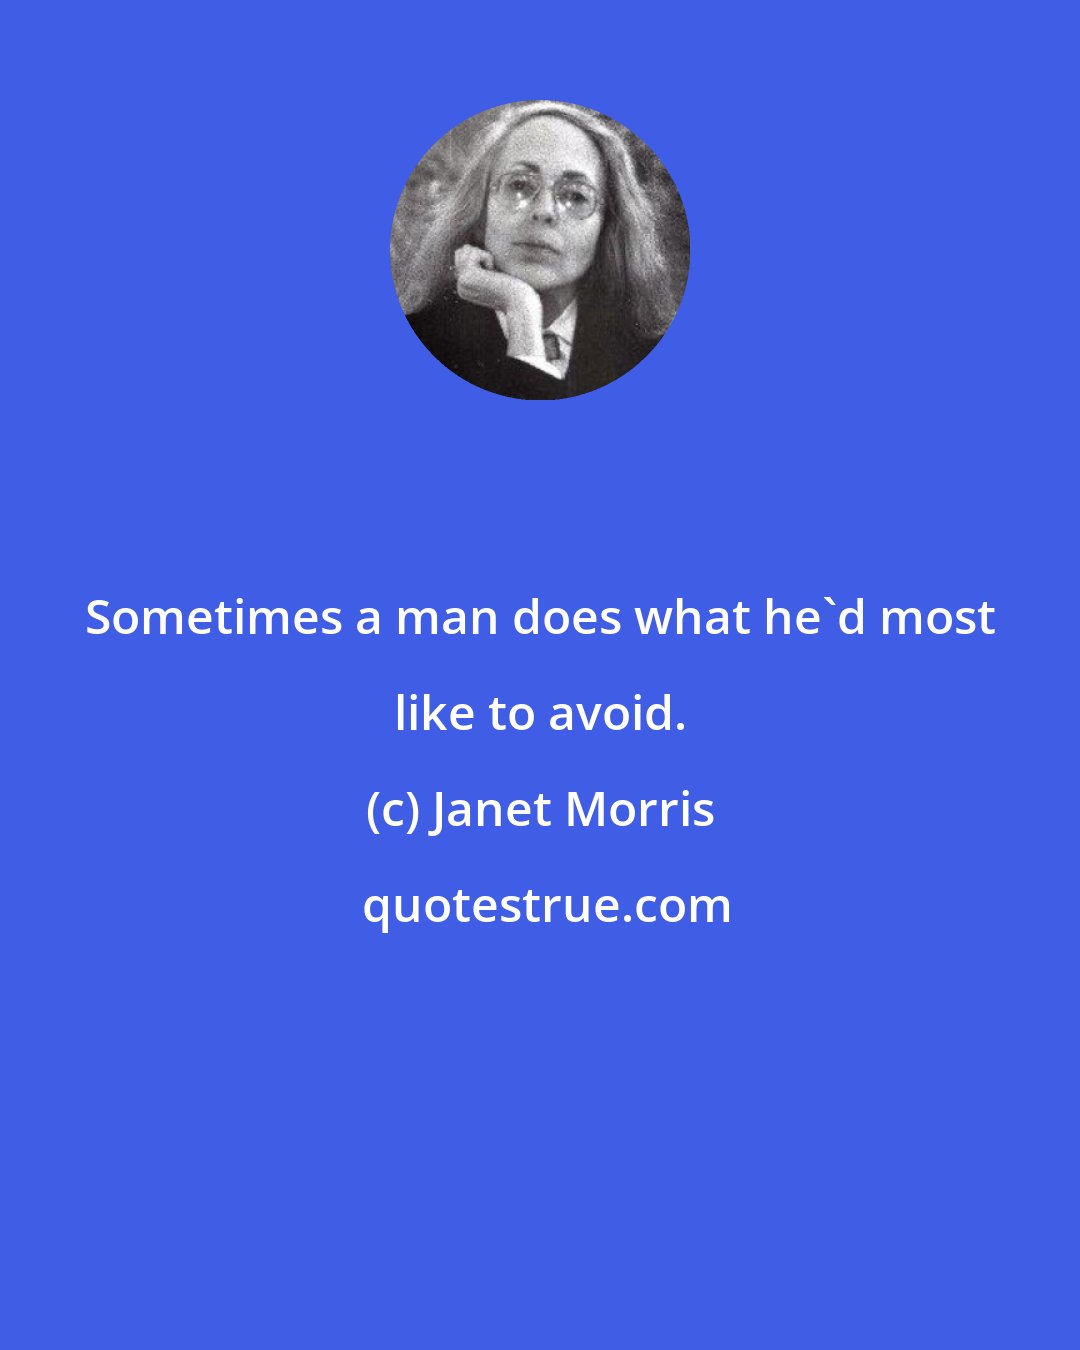 Janet Morris: Sometimes a man does what he'd most like to avoid.